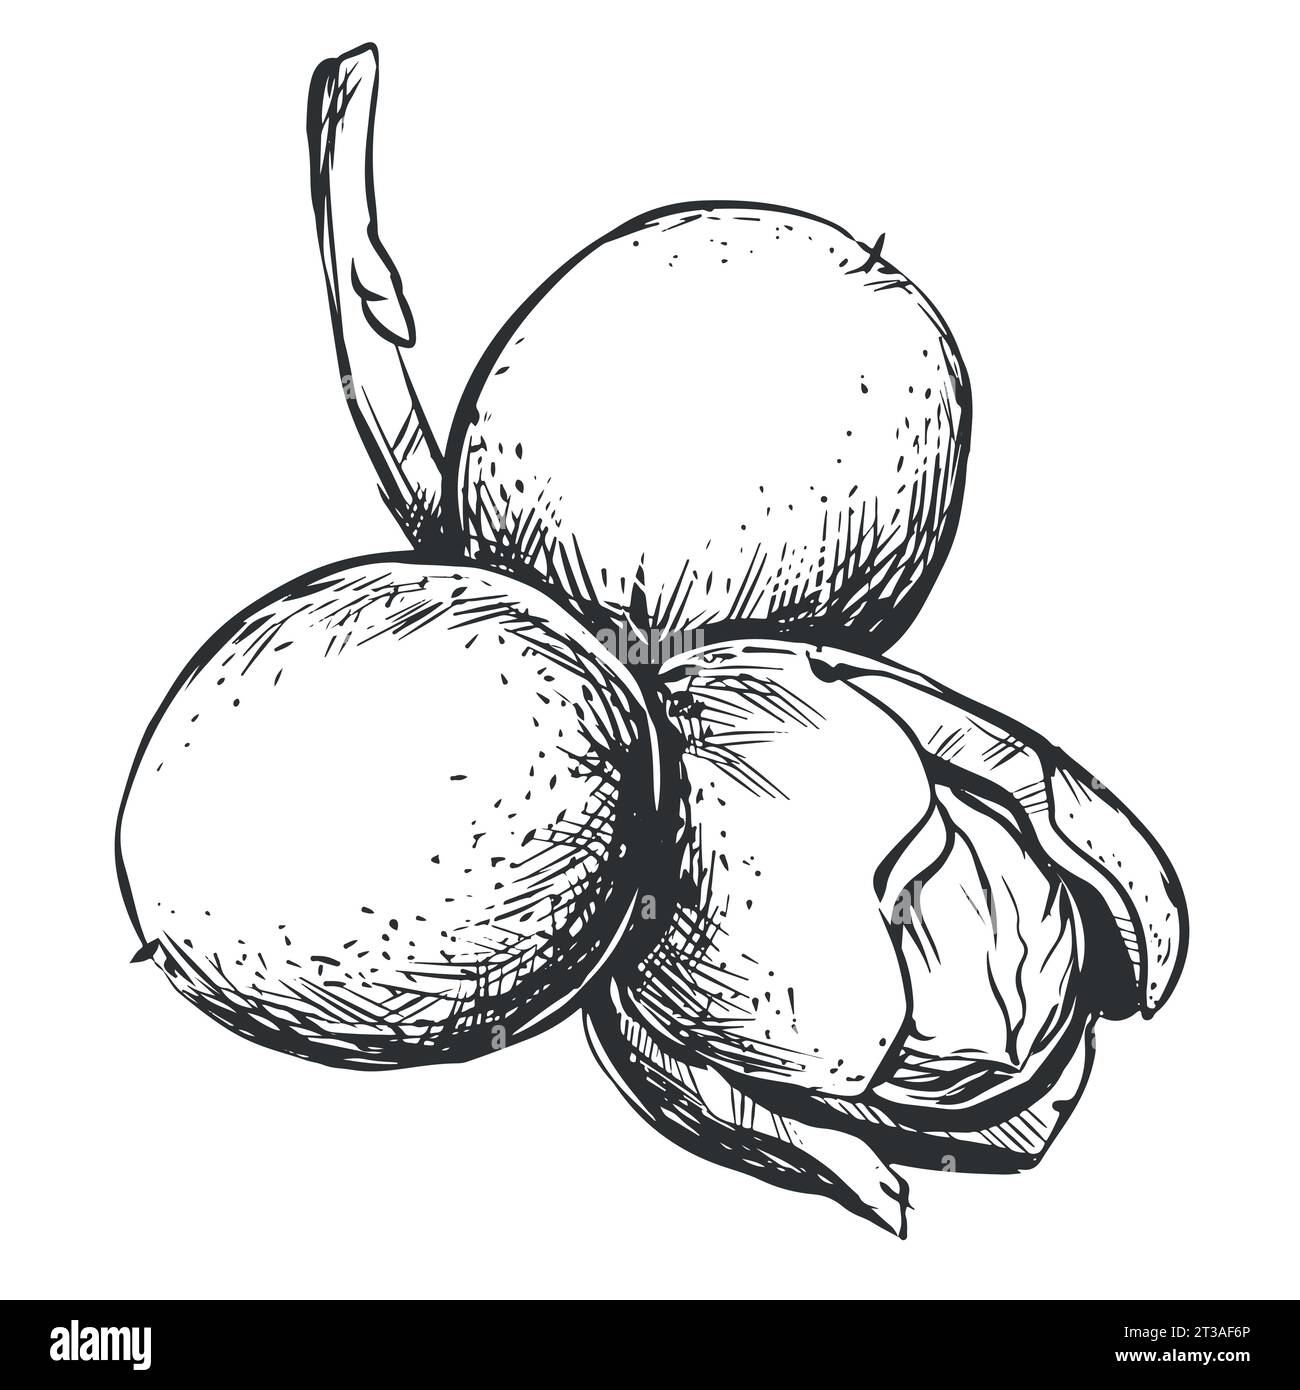 Walnuts are hand drawn. Vector illustration in engraving technique. A branch with fruits in a peel, leaves. Linear ink drawing. Ingredient for the Ita Stock Vector